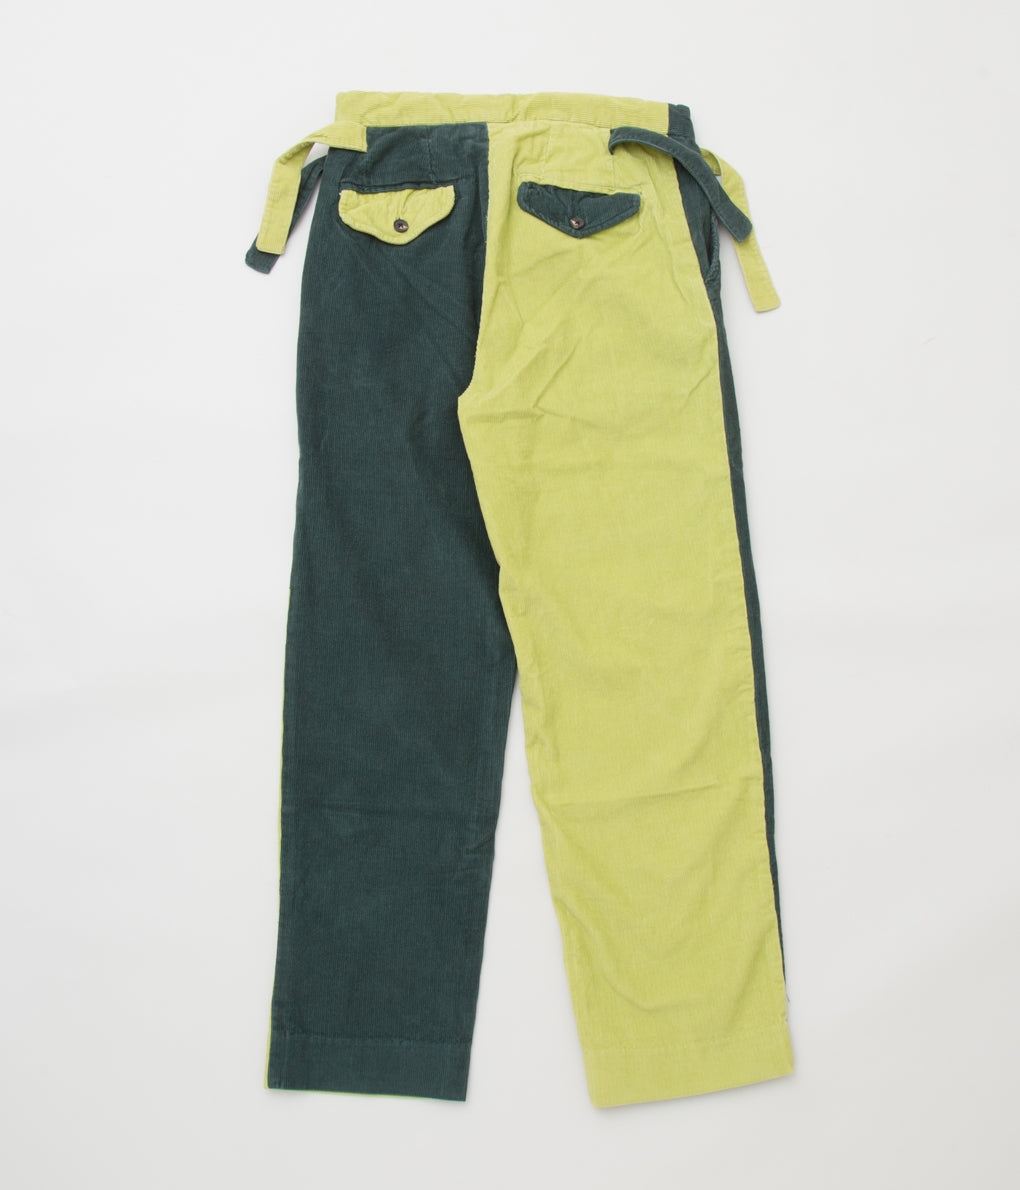 BODE "DUO CORD TROUSER" (SAGE TEAL)